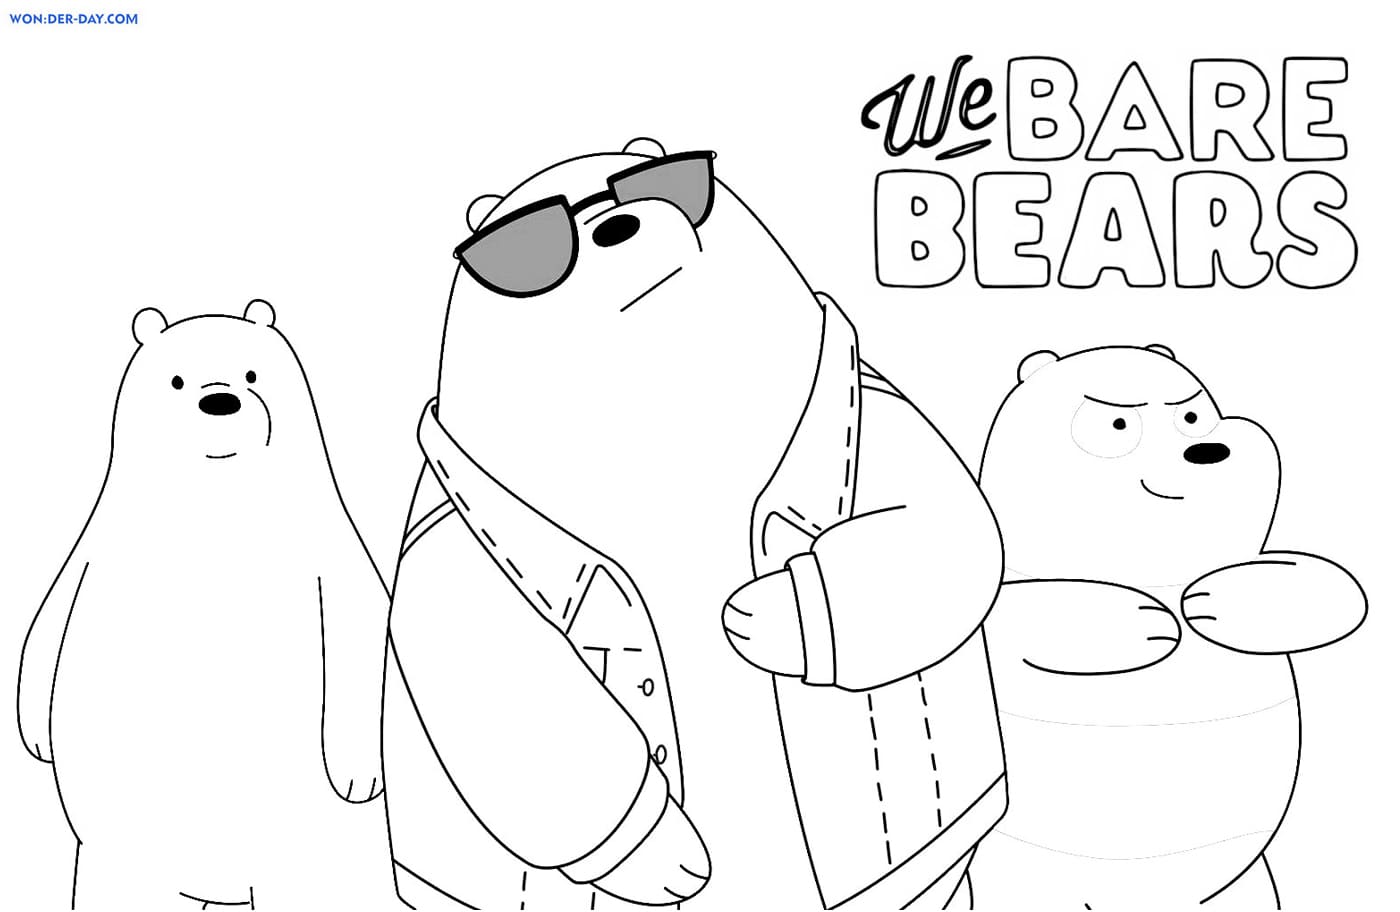 We Bare Bears Coloring Pages - Printable coloring pages